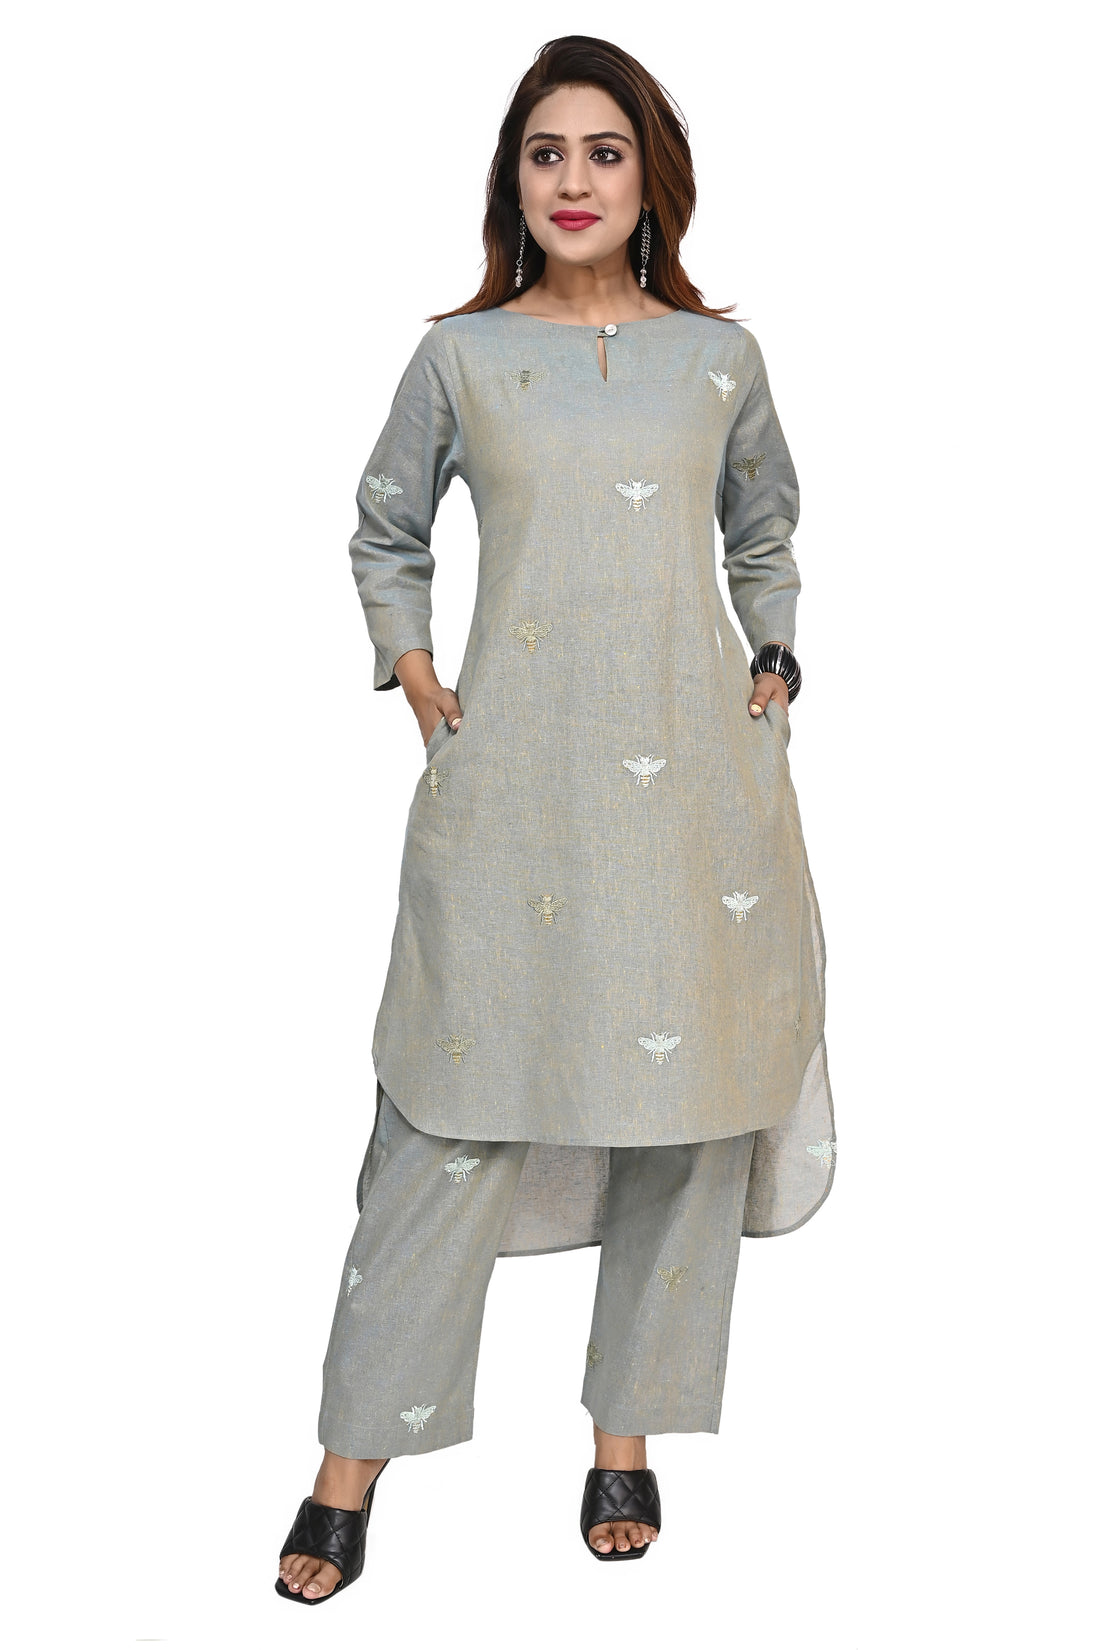 Nirmal online Premium cotton co-ord set kurti for Women in Grey colour with Honey bee embroideryd set